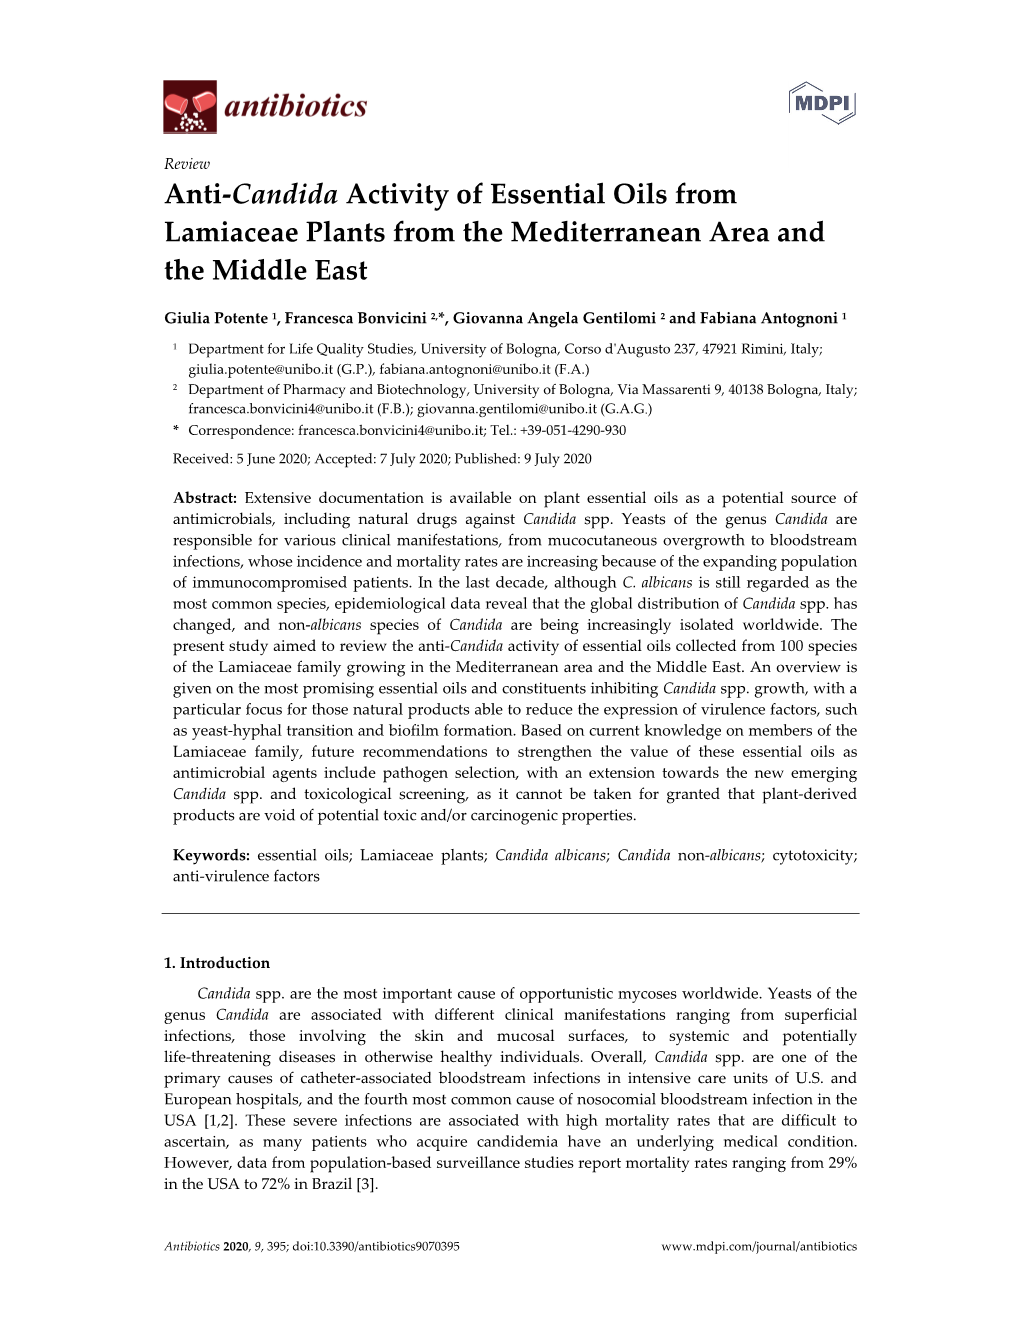 Anti‐Candida Activity of Essential Oils from Lamiaceae Plants from the Mediterranean Area and the Middle East